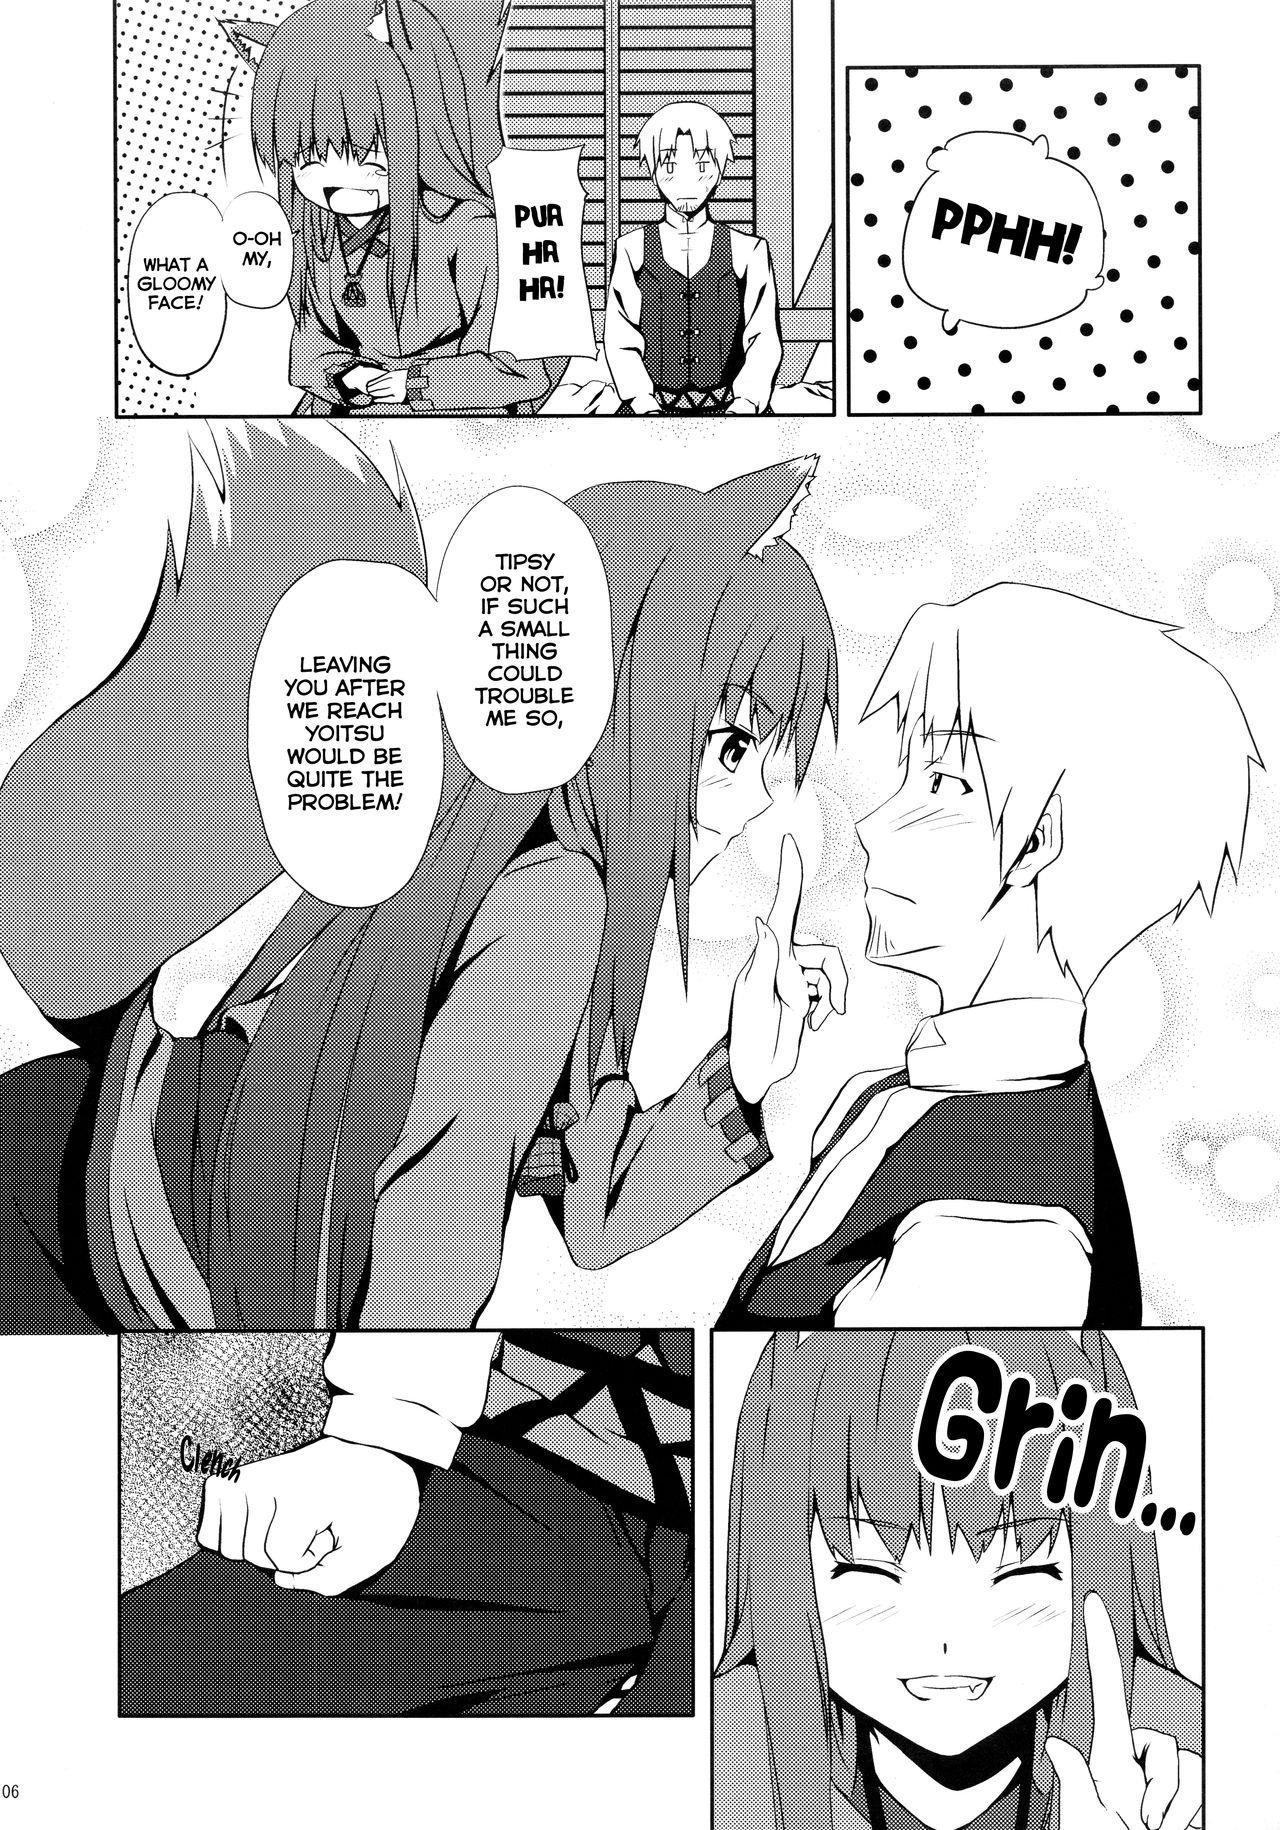 Family Sex Bitter Apple - Spice and wolf Bunduda - Page 6